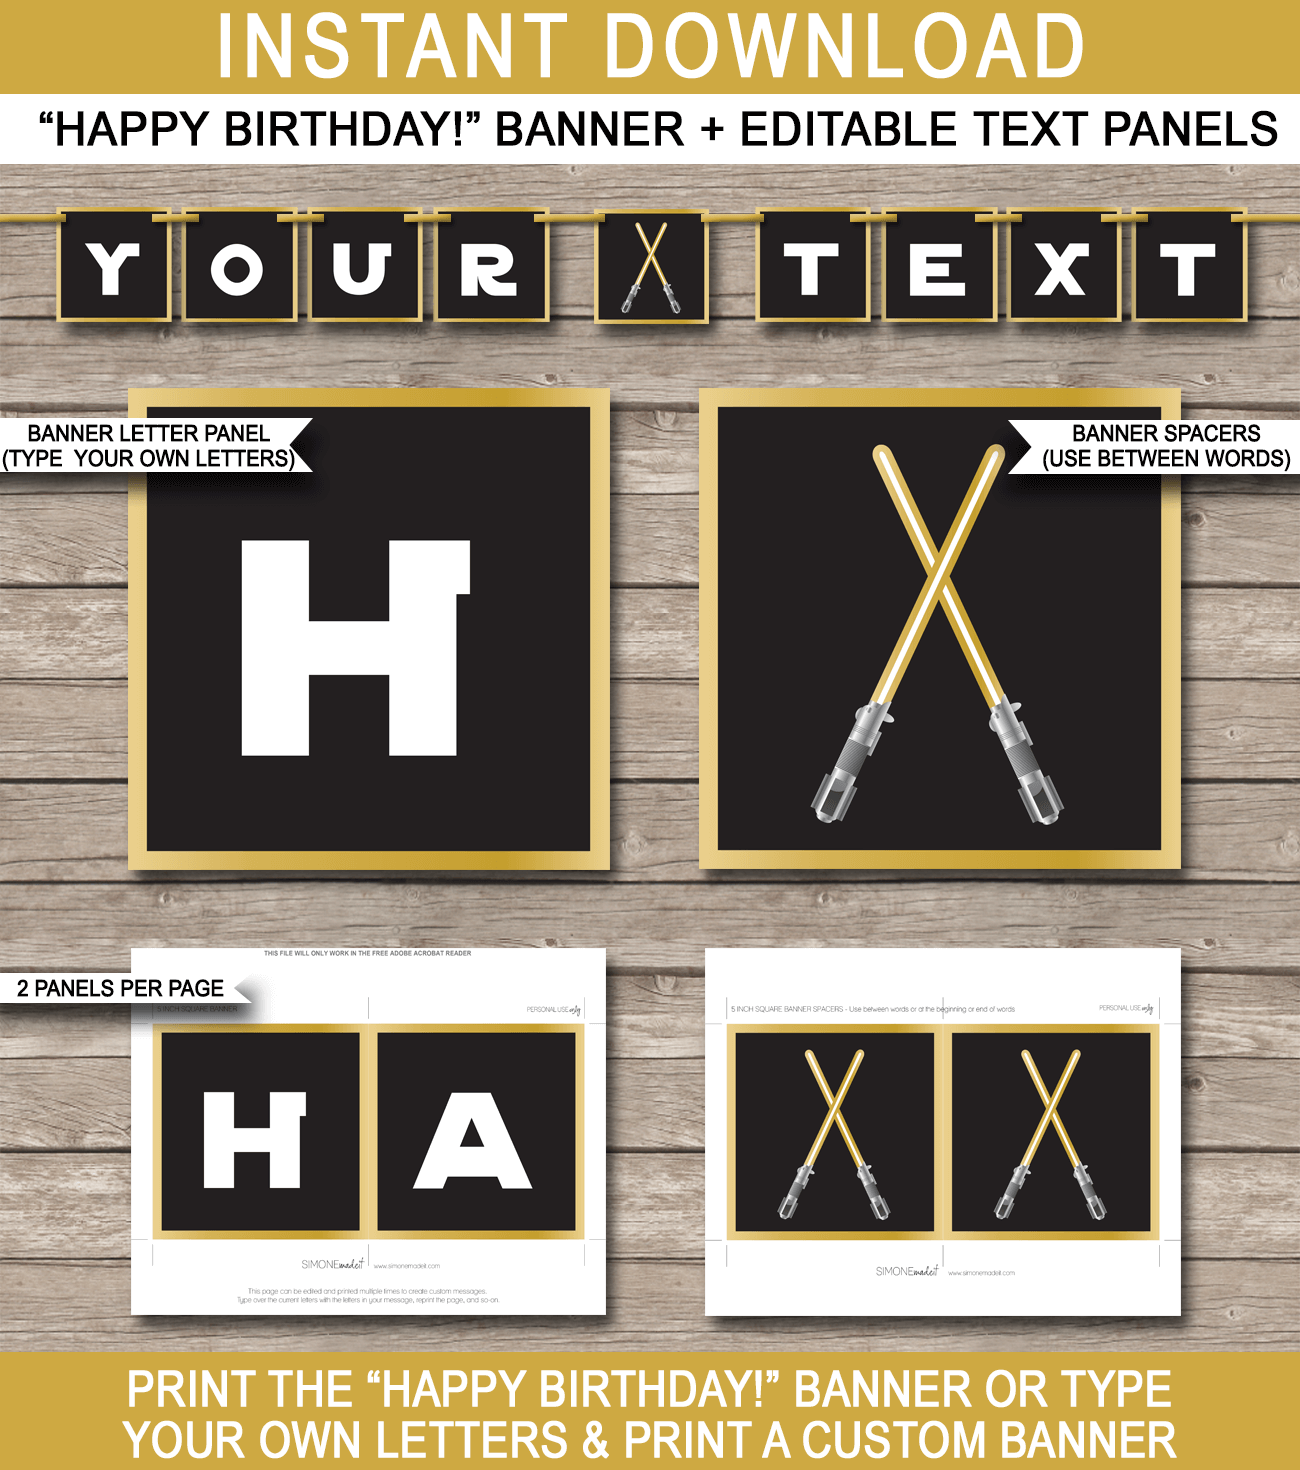 Gold Star Wars Pennant Banner Template - Star Wars Bunting - Happy Birthday Banner - Birthday Party - Editable and Printable DIY Template - INSTANT DOWNLOAD $4.50 via simonemadeit.com